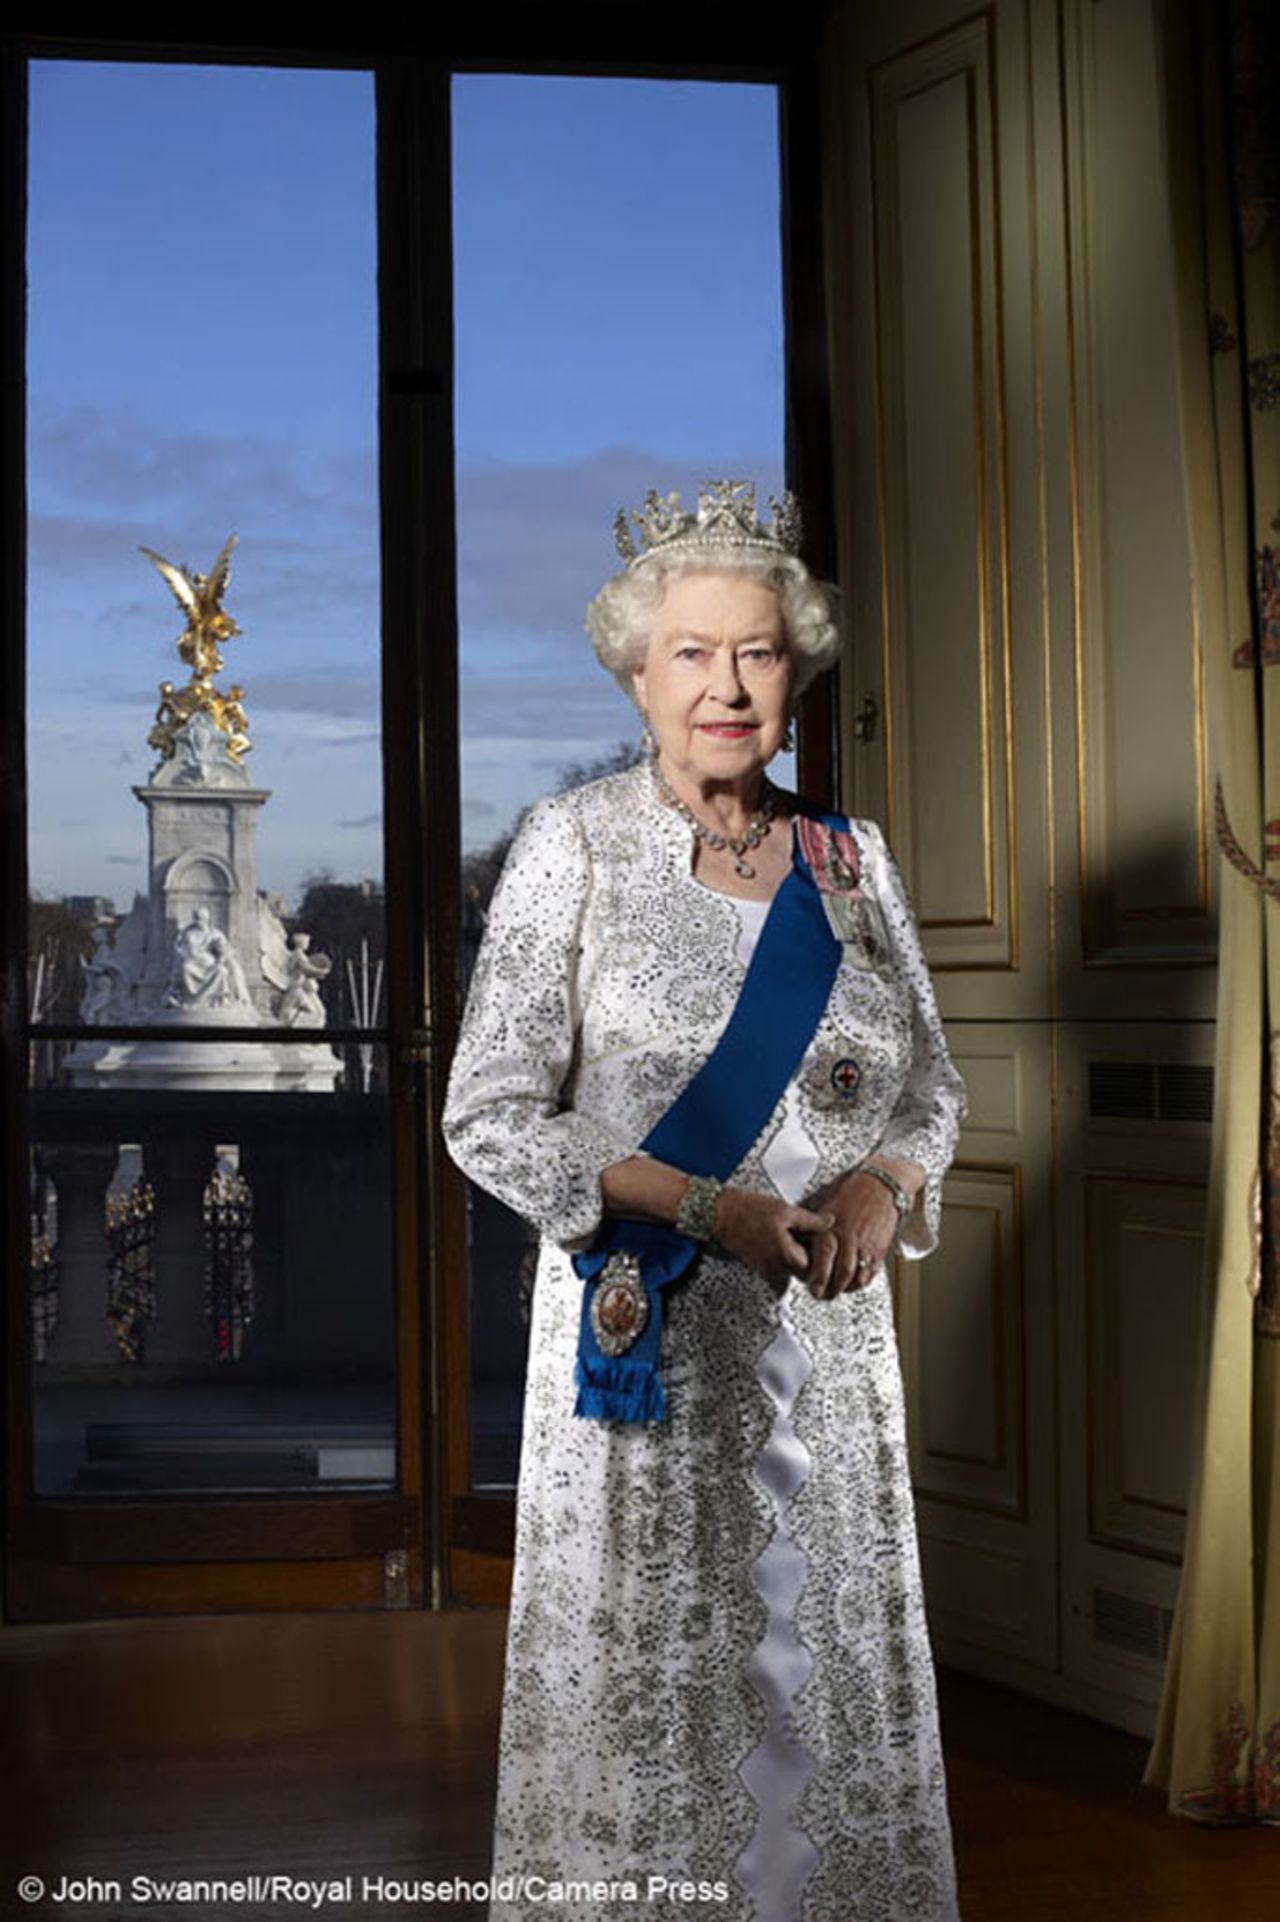 This specially commissioned photograph of the queen was released by Buckingham Palace to mark the Diamond Jubilee.